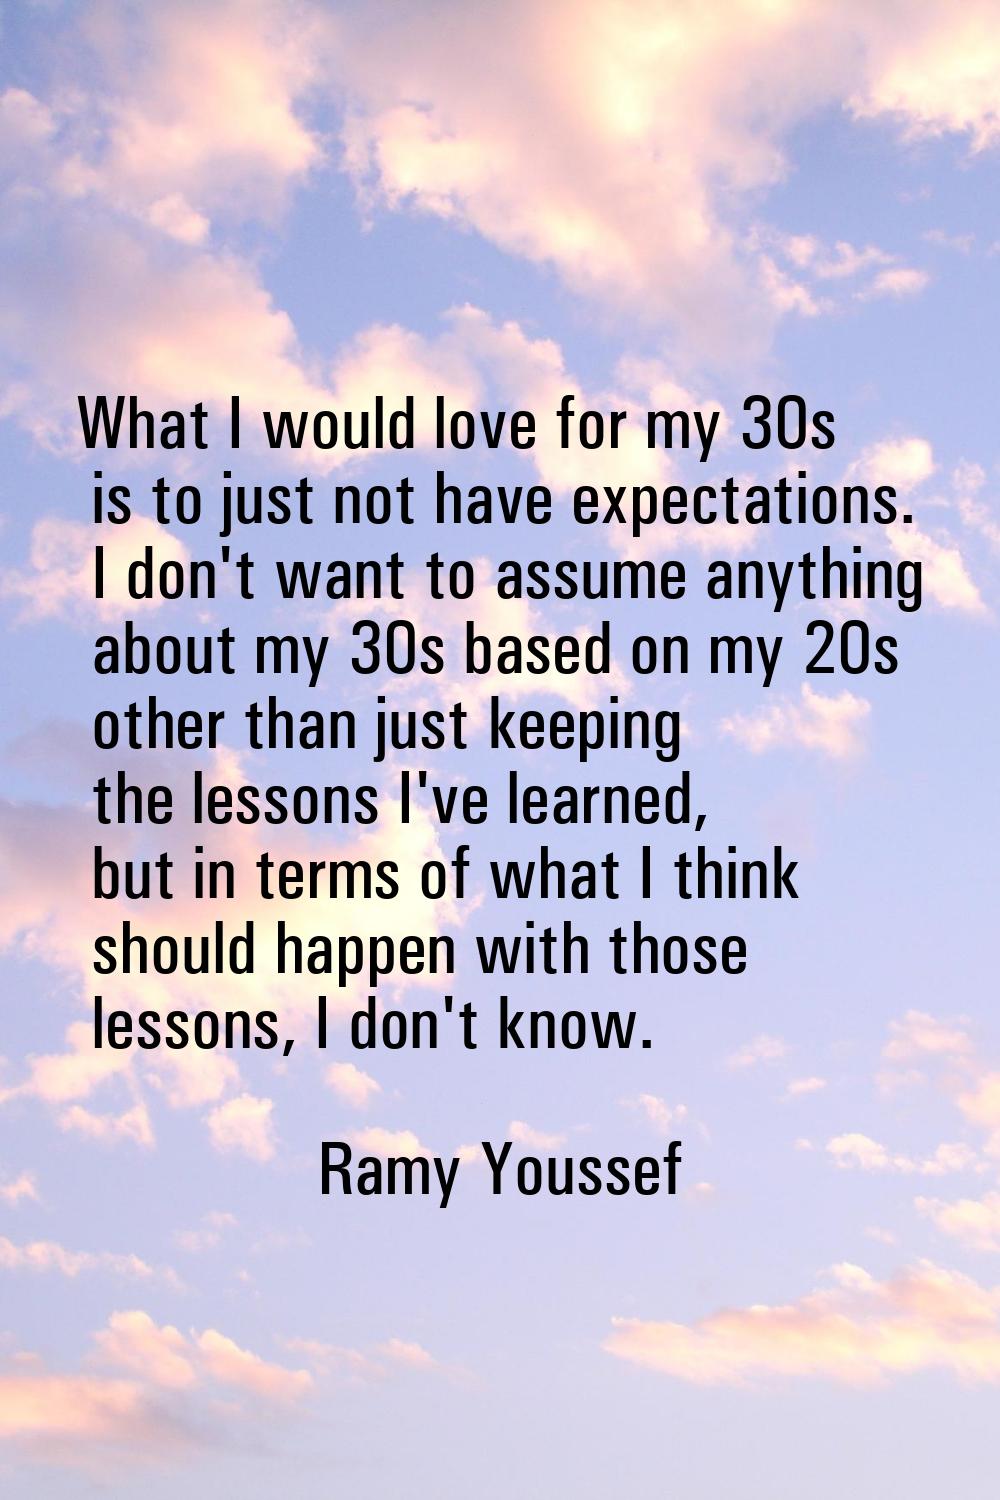 What I would love for my 30s is to just not have expectations. I don't want to assume anything abou